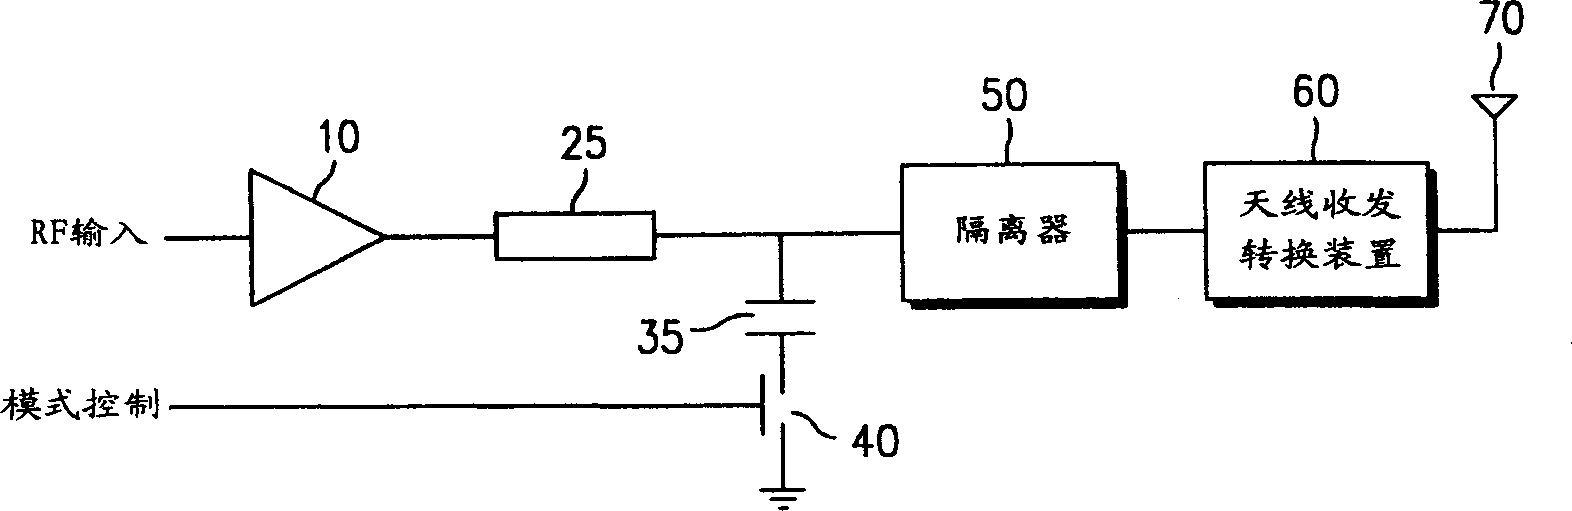 Electric efficiency raising circuit of radio-frequency power amplifier in double-mode mobile telephone